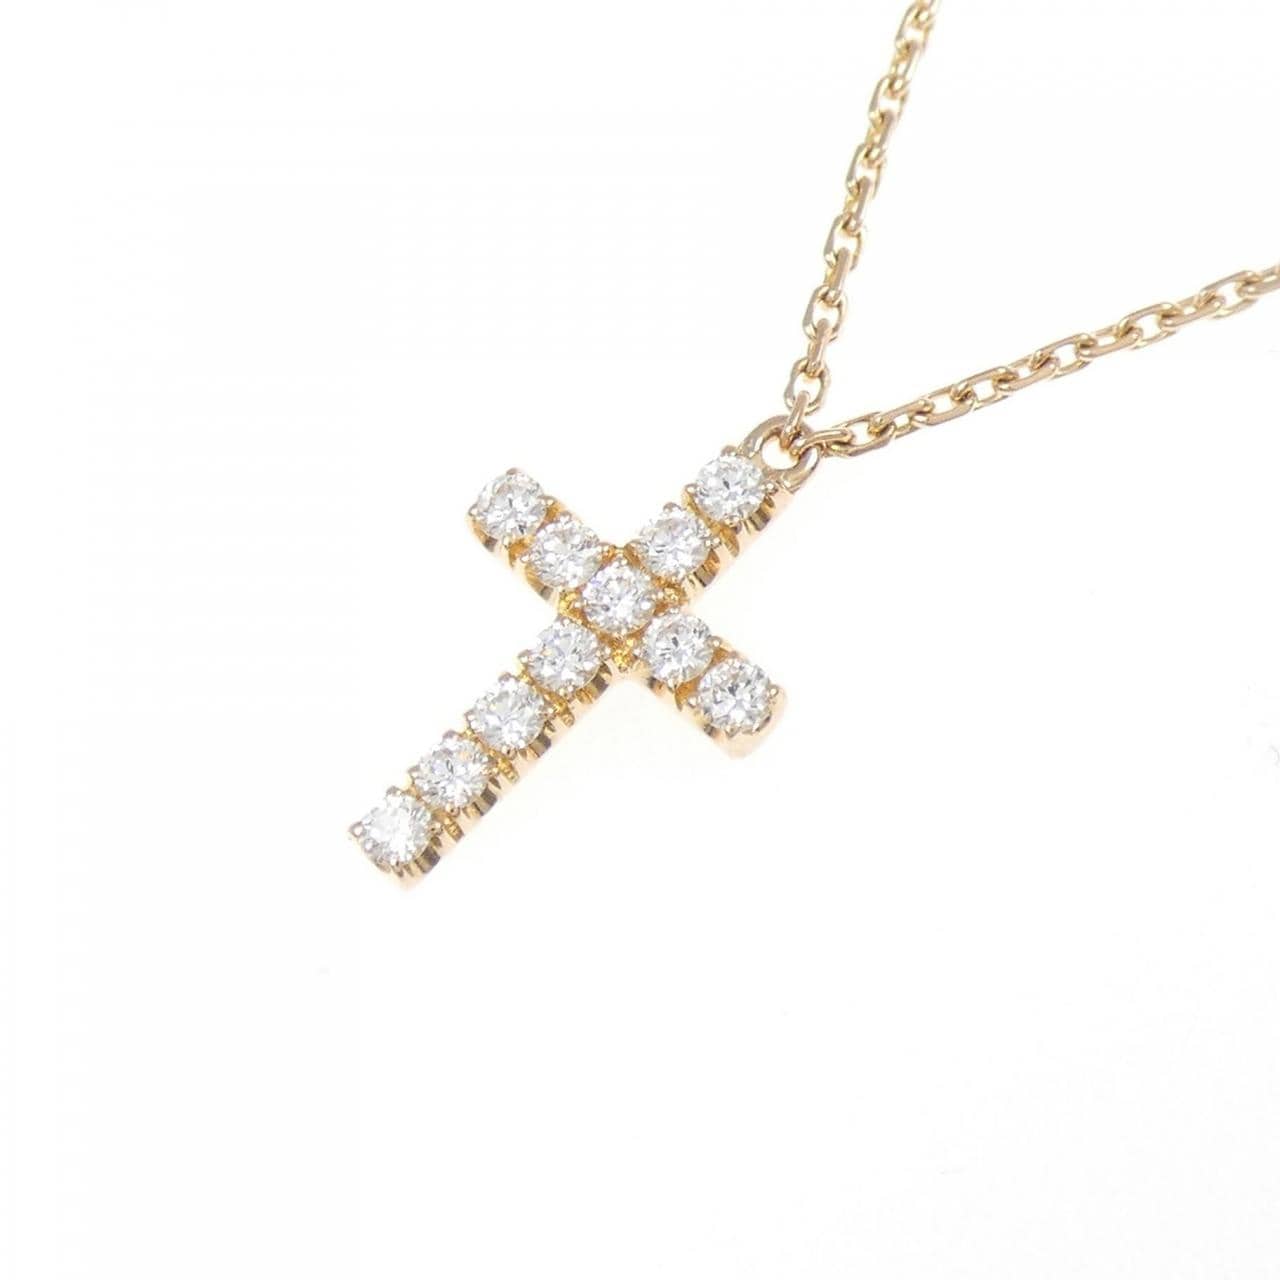 Gold Cross Necklace for Women With Baguette Cubic Zirconia, Dainty Gold  Plated Pendant Necklace for Teen Girls and Women With CZ Stones - Etsy